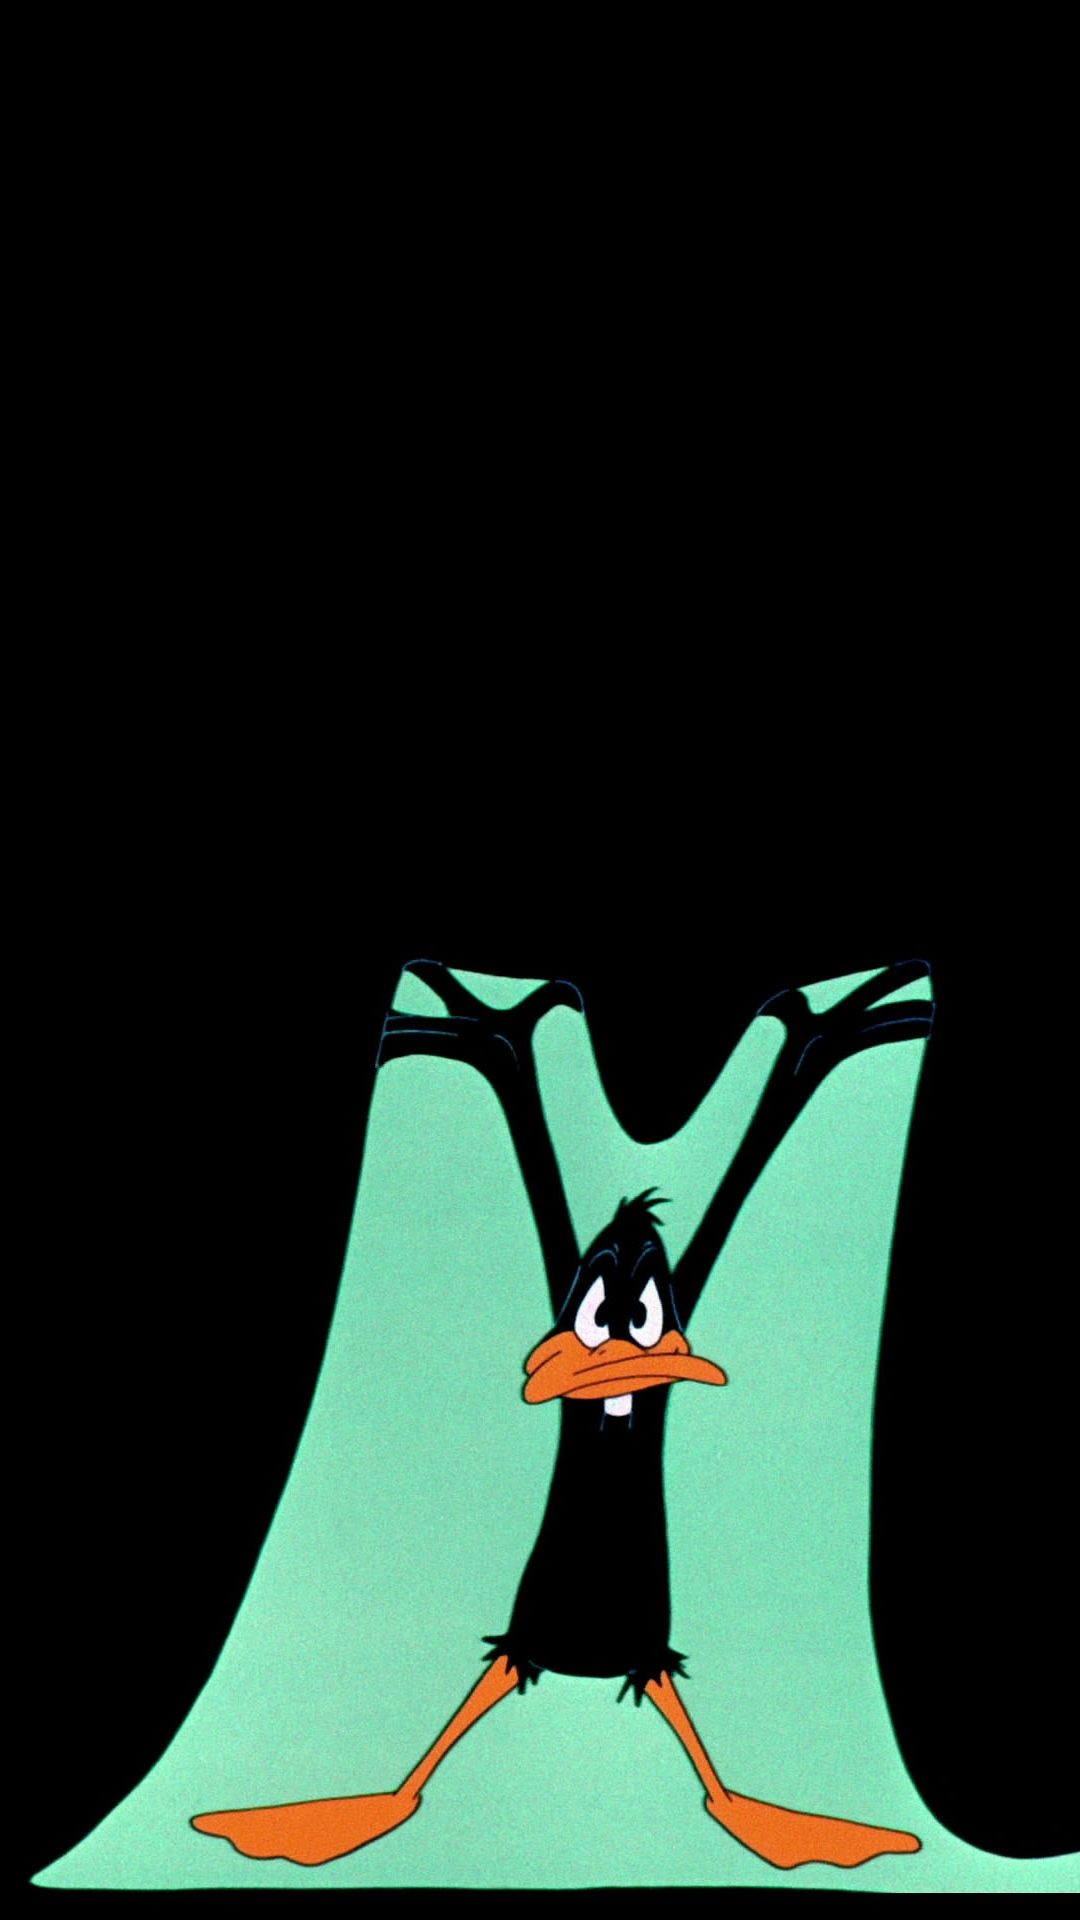 Looney Toons, Vibrant phone wallpapers, Toons in HD, Playful backgrounds, 1080x1920 Full HD Phone